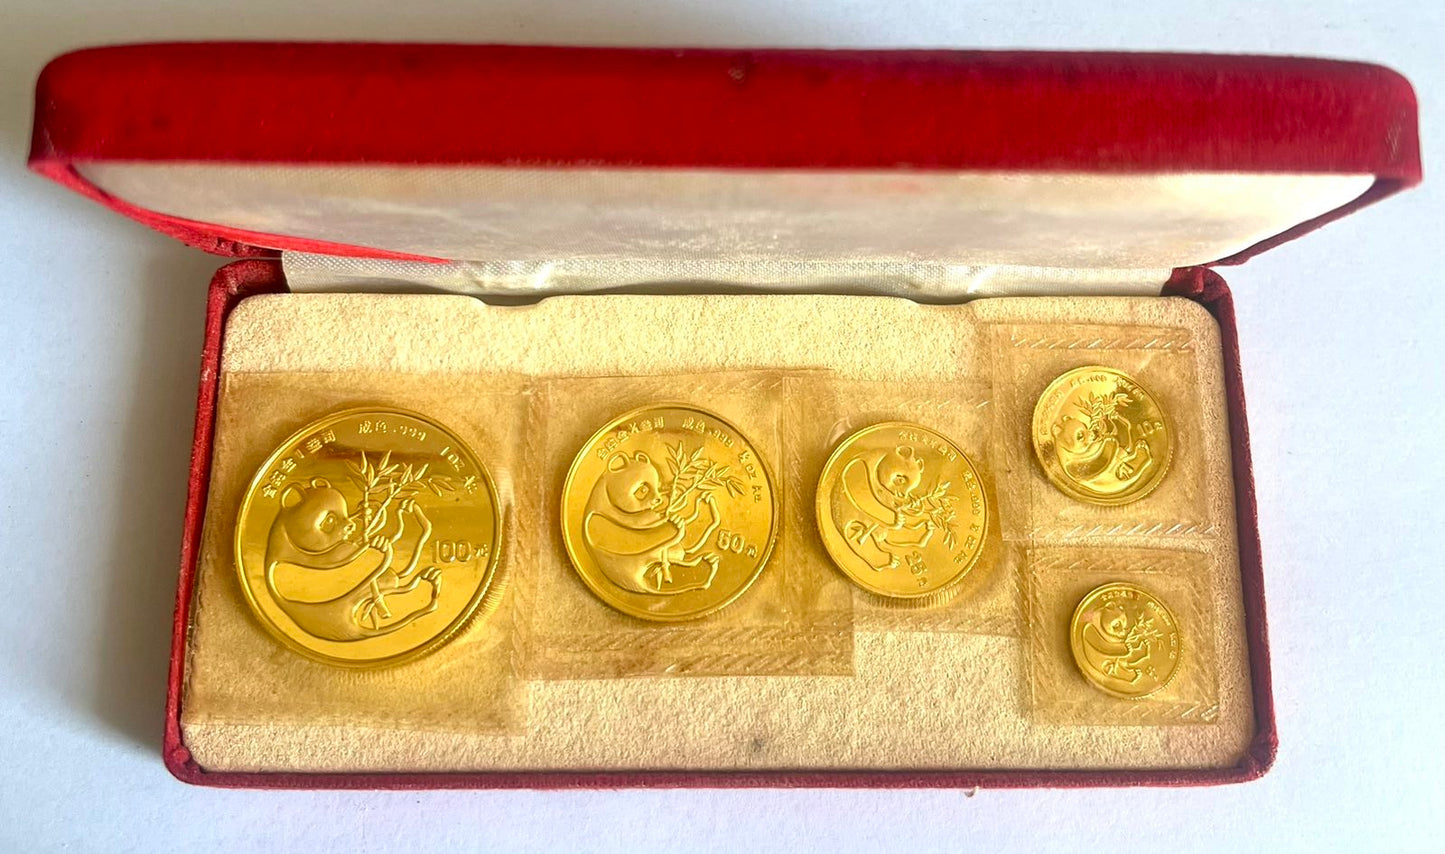 1984 China Panda 5-Coin Set (1 oz, 1/2 oz, 1/4 oz, 1/10 oz, 1/20 oz for a total of 1.90 oz) Gold Coins in Mint-Sealed Packaging (note: some coins contain toning)